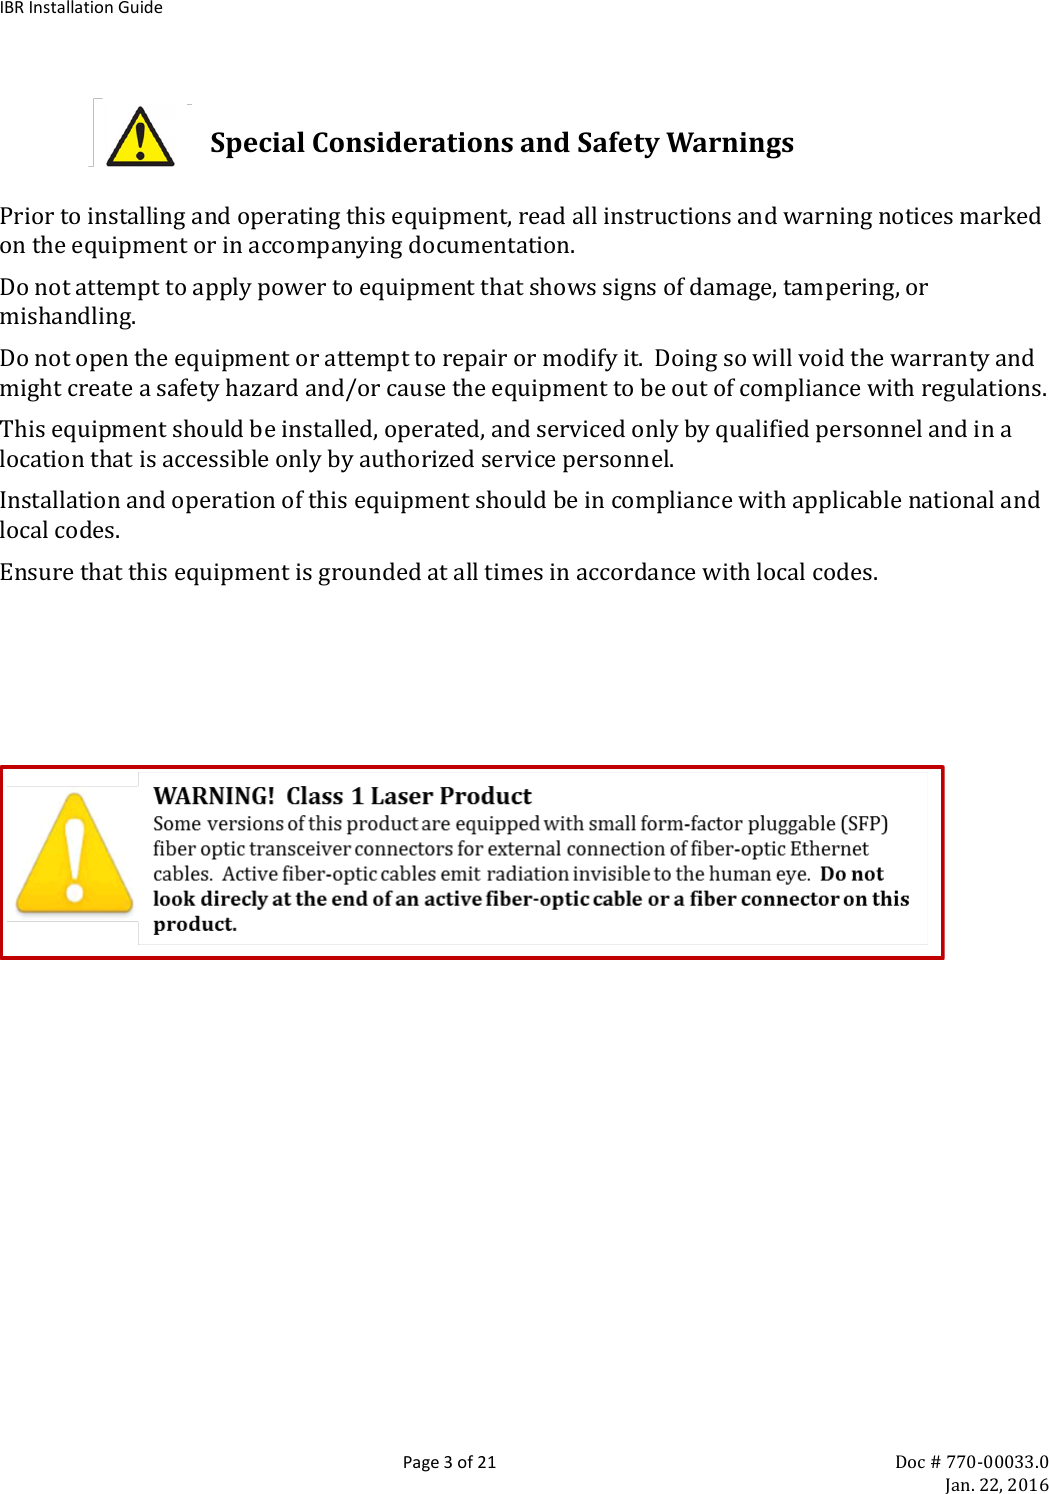 IBR Installation Guide  Page 3 of 21 Doc # 770-00033.0     Jan. 22, 2016  Special Considerations and Safety Warnings  Prior to installing and operating this equipment, read all instructions and warning notices marked on the equipment or in accompanying documentation.  Do not attempt to apply power to equipment that shows signs of damage, tampering, or mishandling.  Do not open the equipment or attempt to repair or modify it.  Doing so will void the warranty and might create a safety hazard and/or cause the equipment to be out of compliance with regulations. This equipment should be installed, operated, and serviced only by qualified personnel and in a location that is accessible only by authorized service personnel. Installation and operation of this equipment should be in compliance with applicable national and local codes. Ensure that this equipment is grounded at all times in accordance with local codes.           